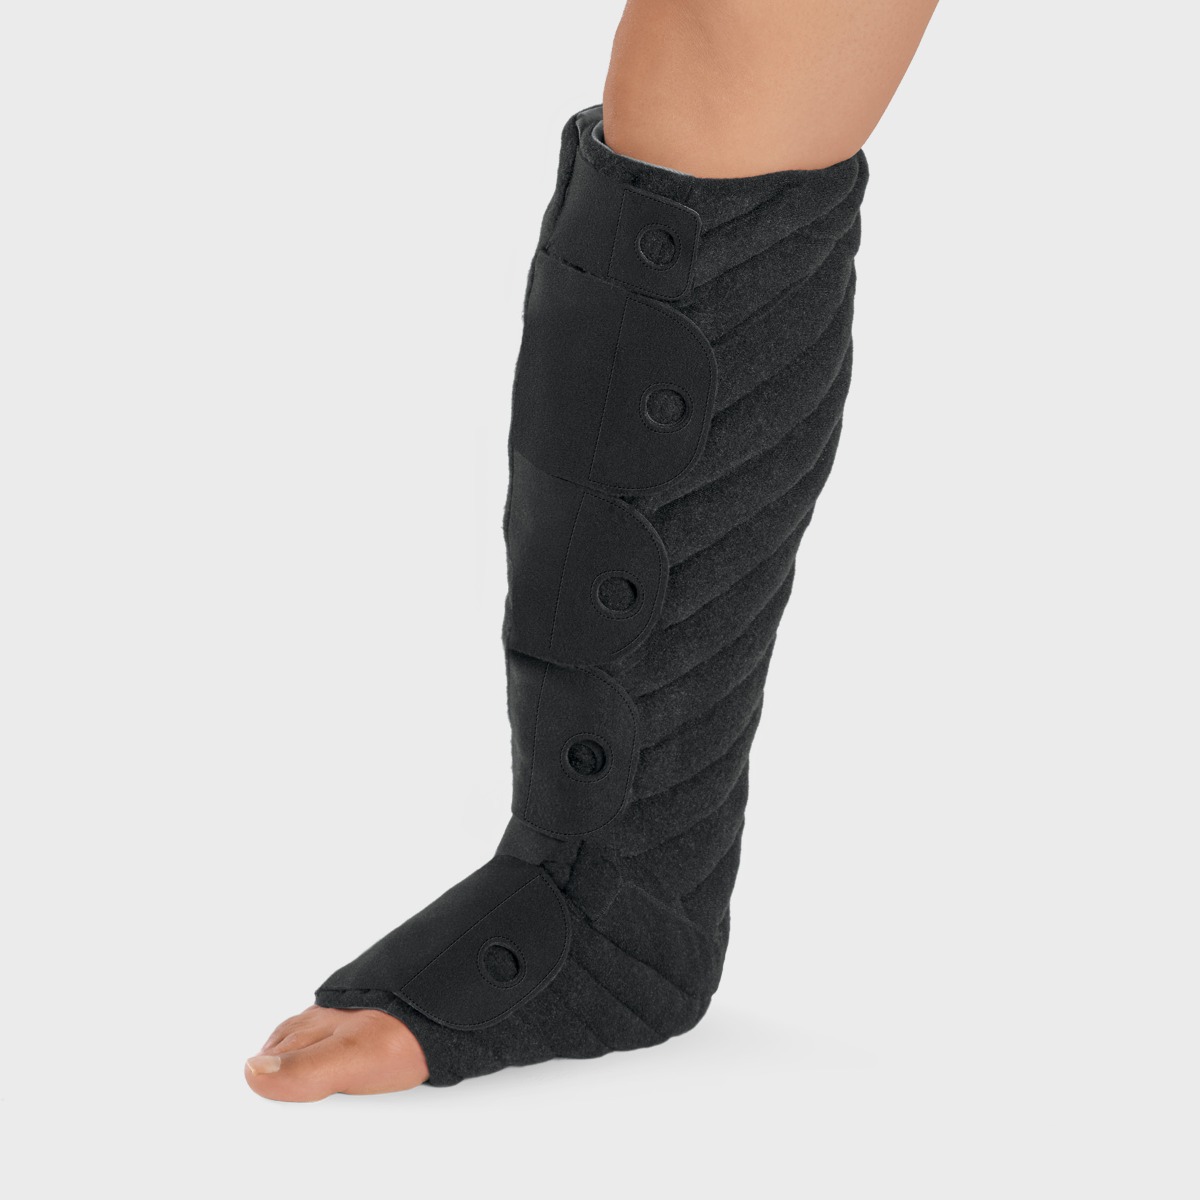 Ready-To-Wear Adjustable Foam Compression Garments - Lymphedema - Products